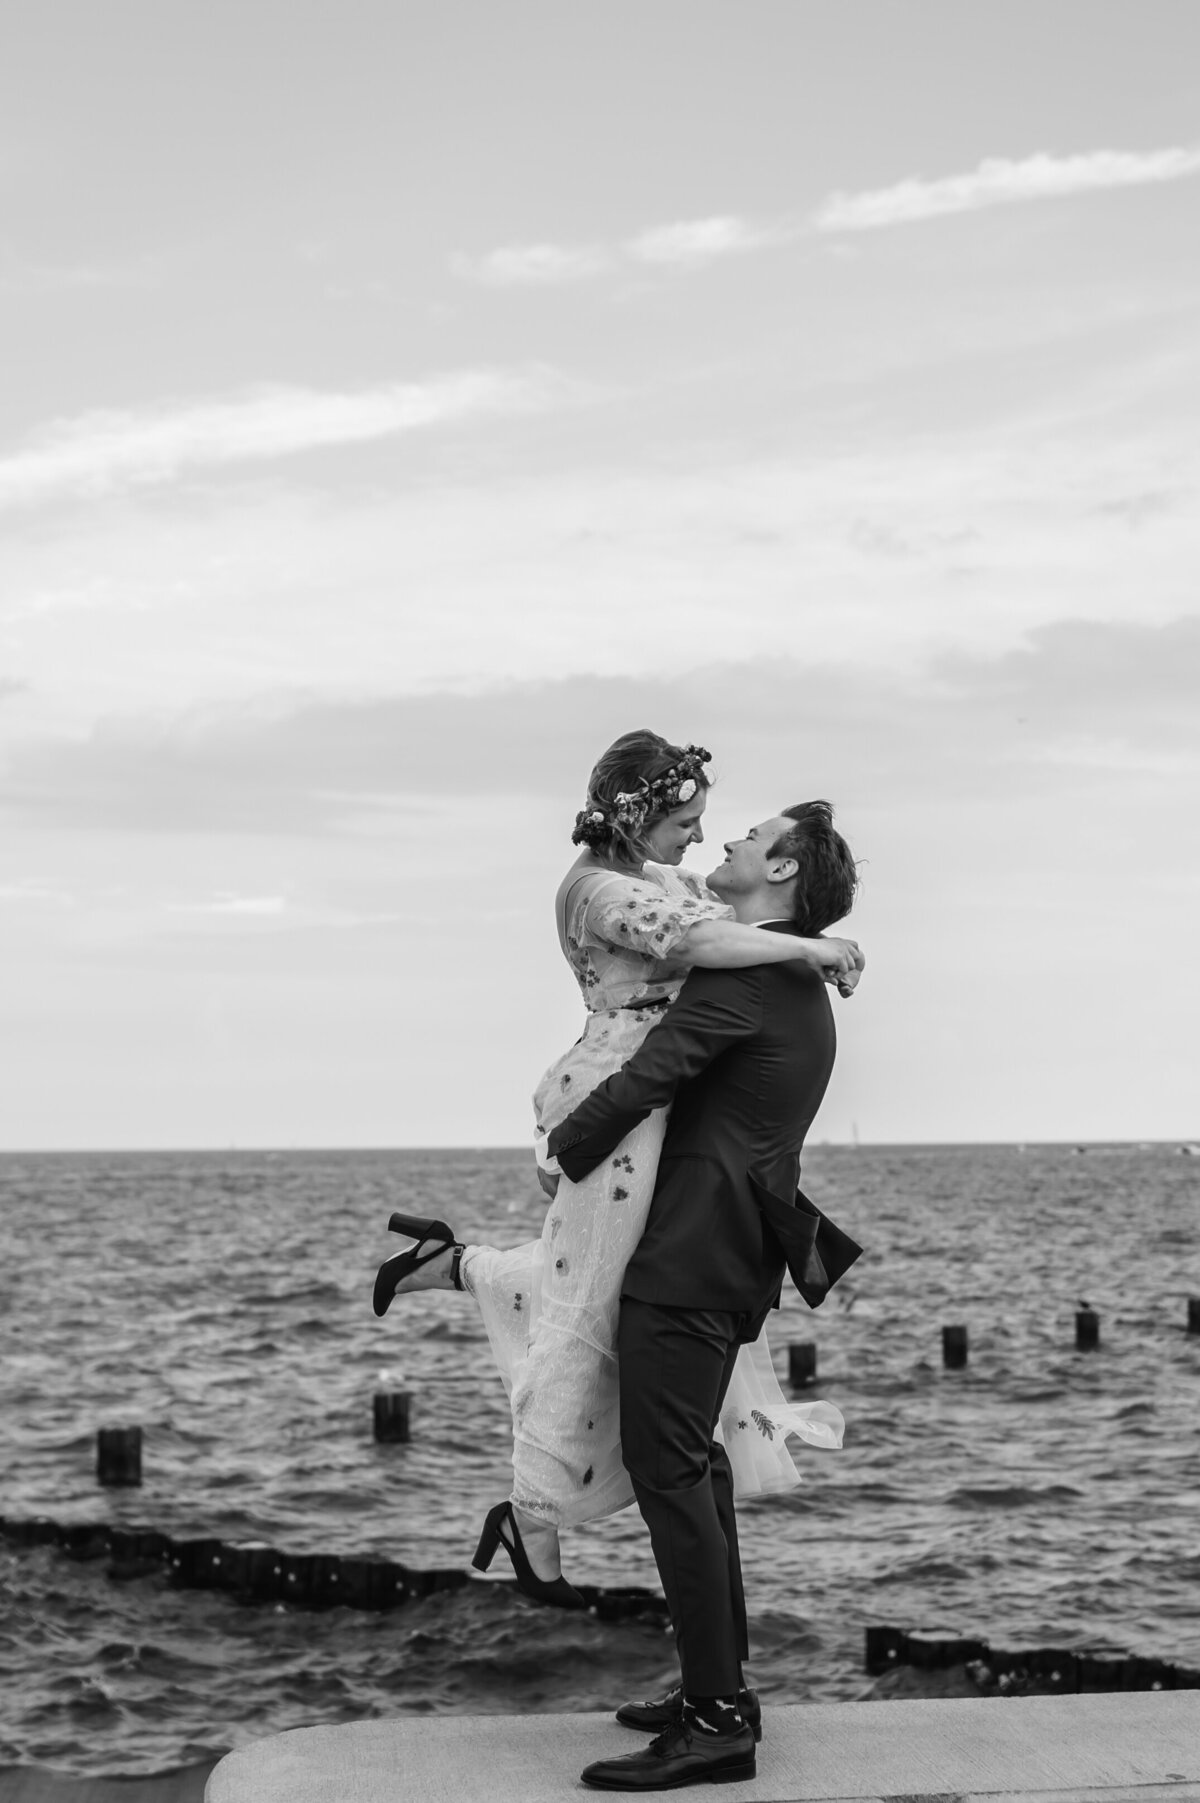 A groom picks ups his bride in front of Lake Michigan